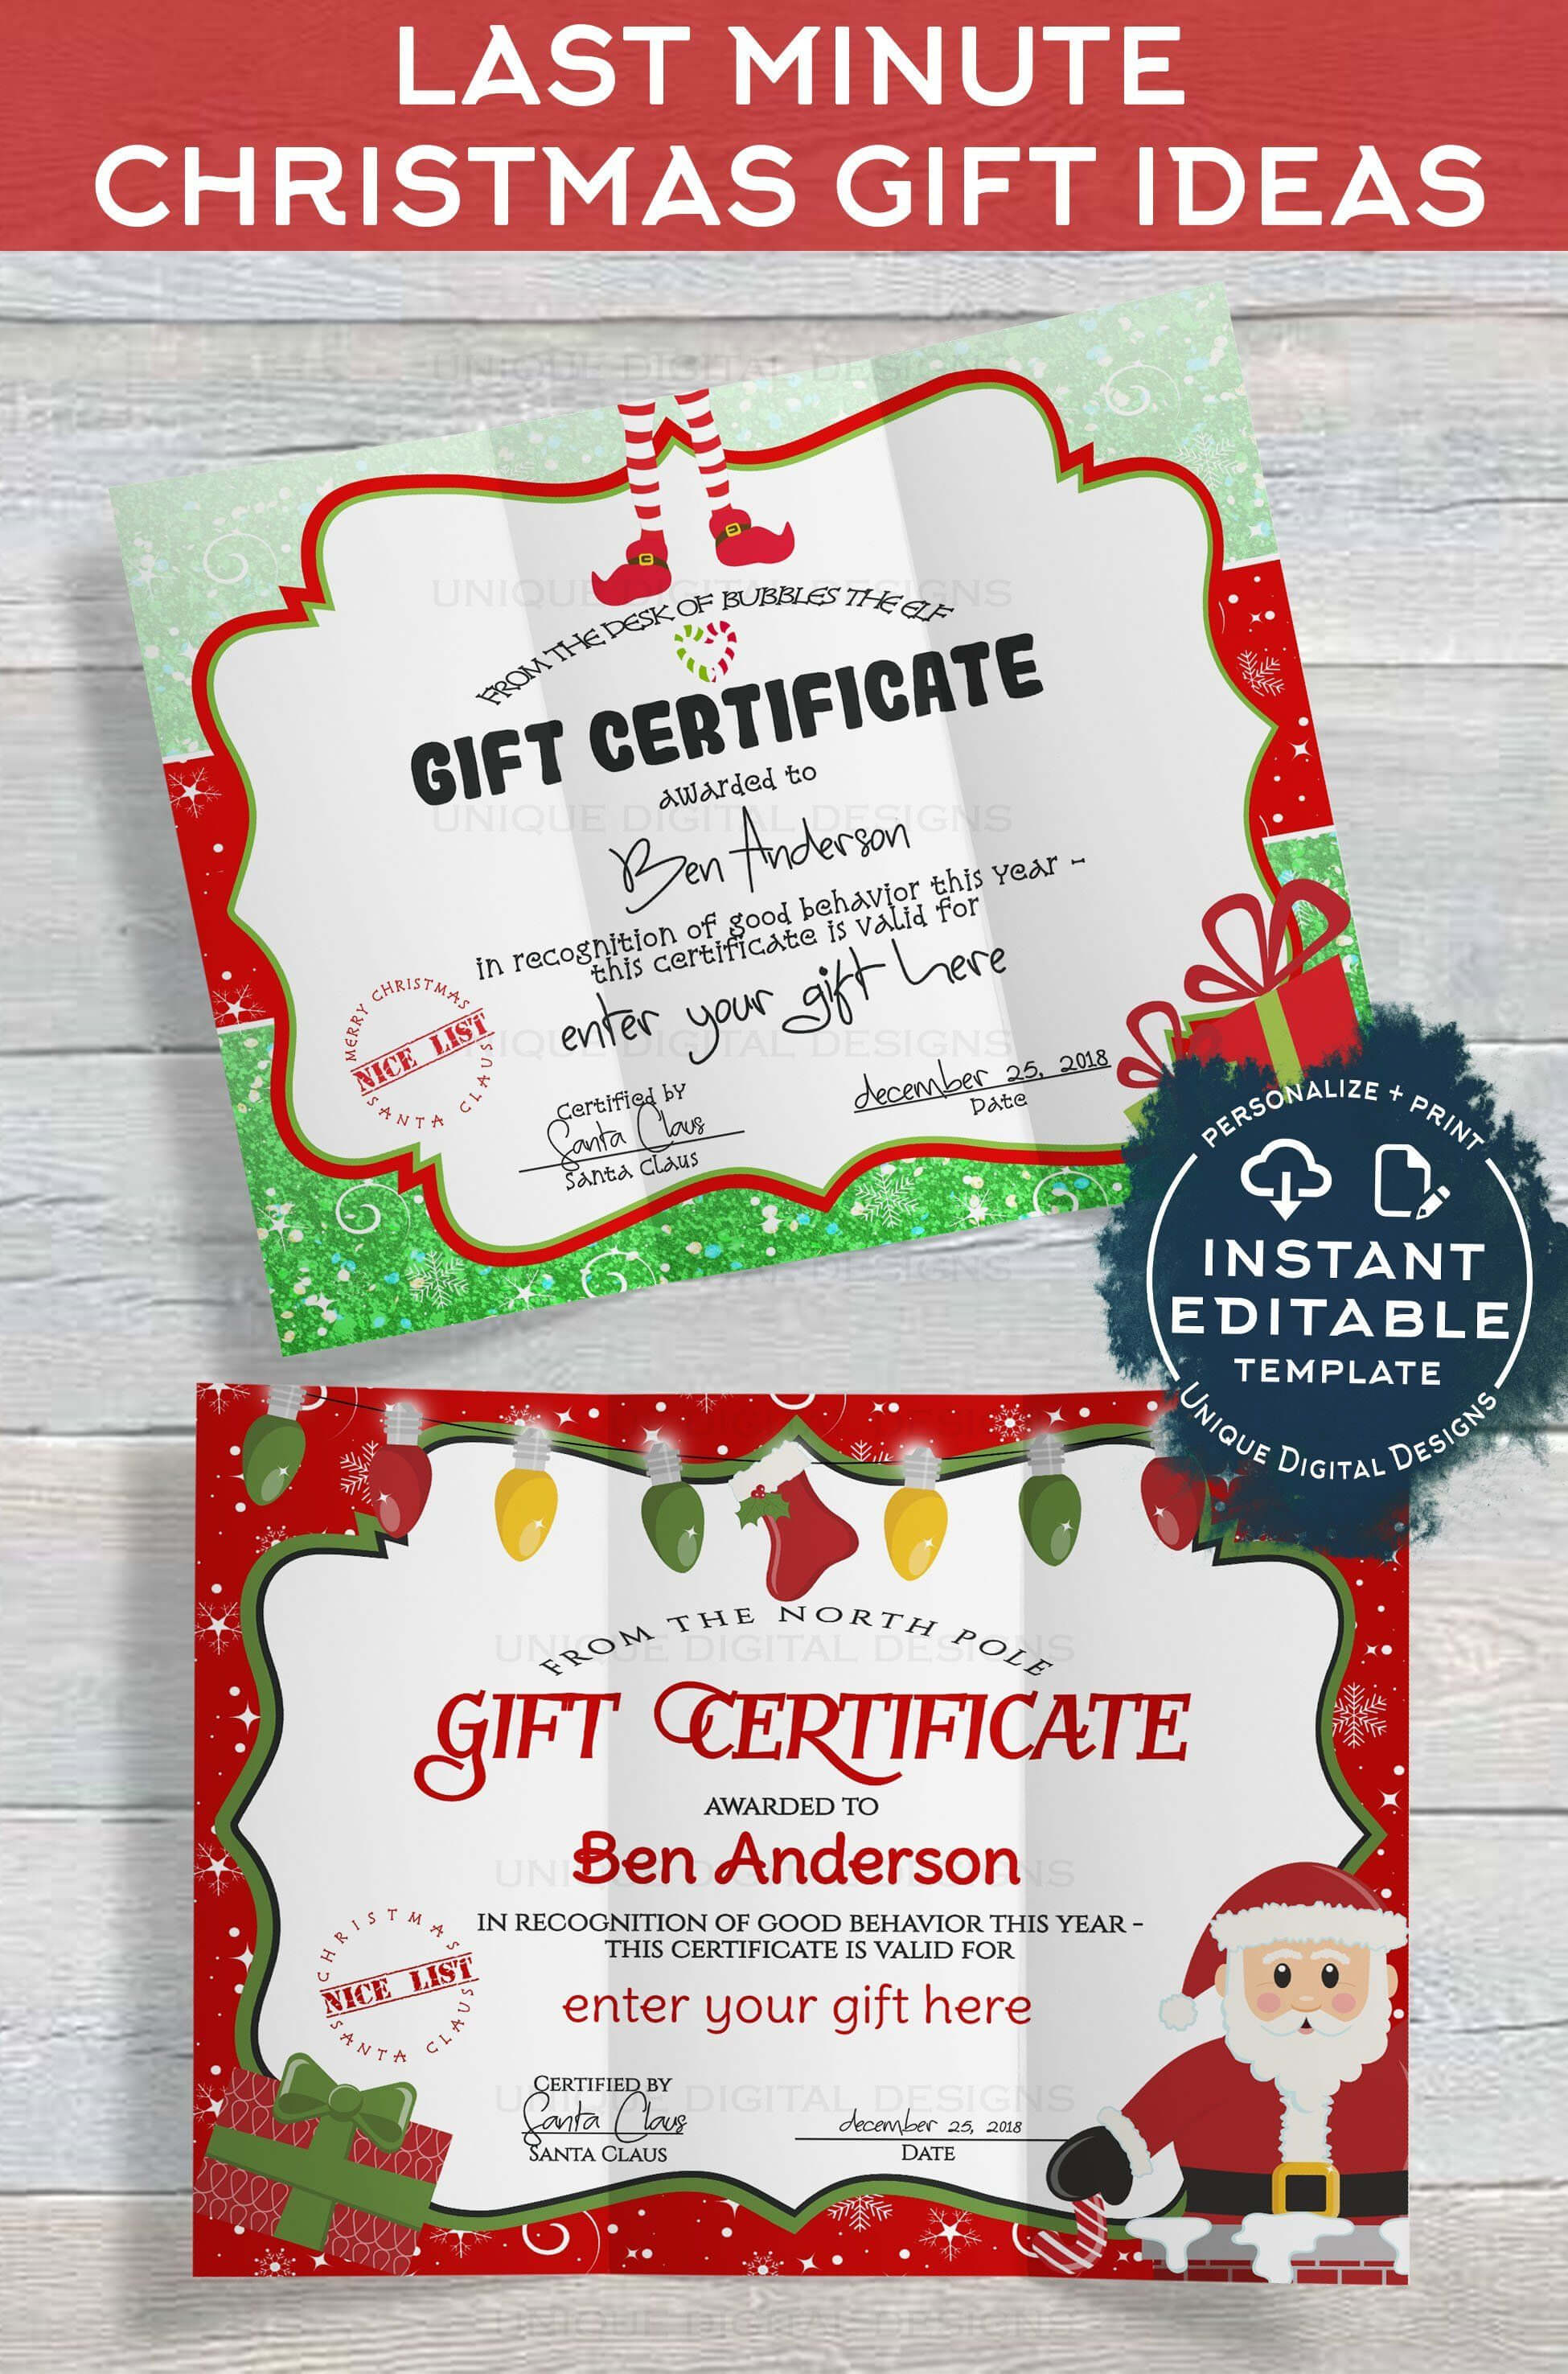 Gift Certificate Template, Editable Gift Certificate From Pertaining To Christmas Gift Certificate Template Free Download